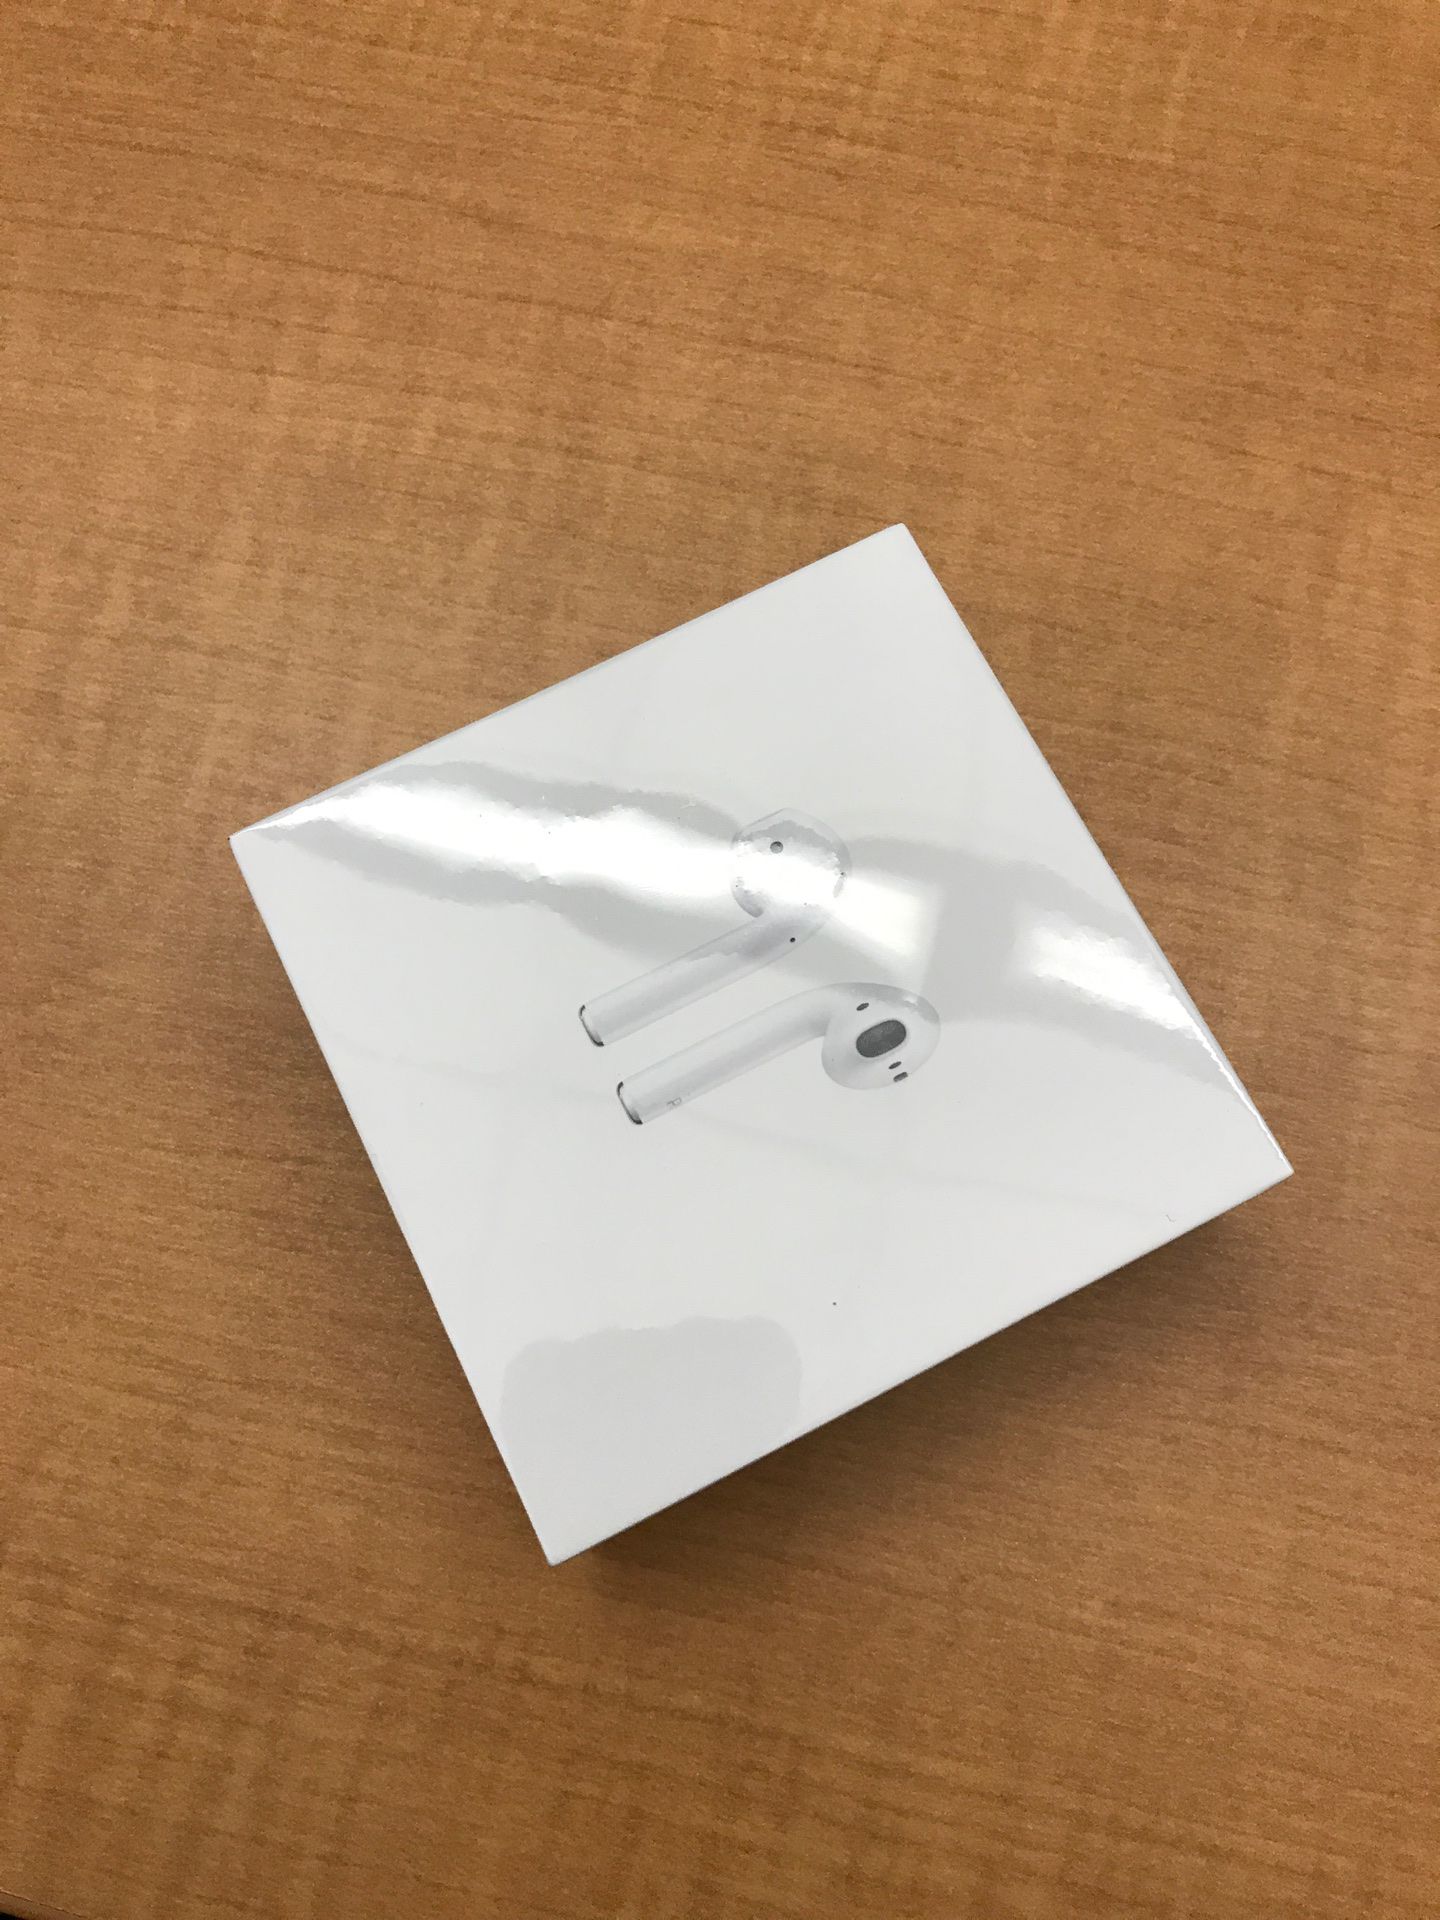 AIRPODS 2ND GEN SEALED NEW IN BOX